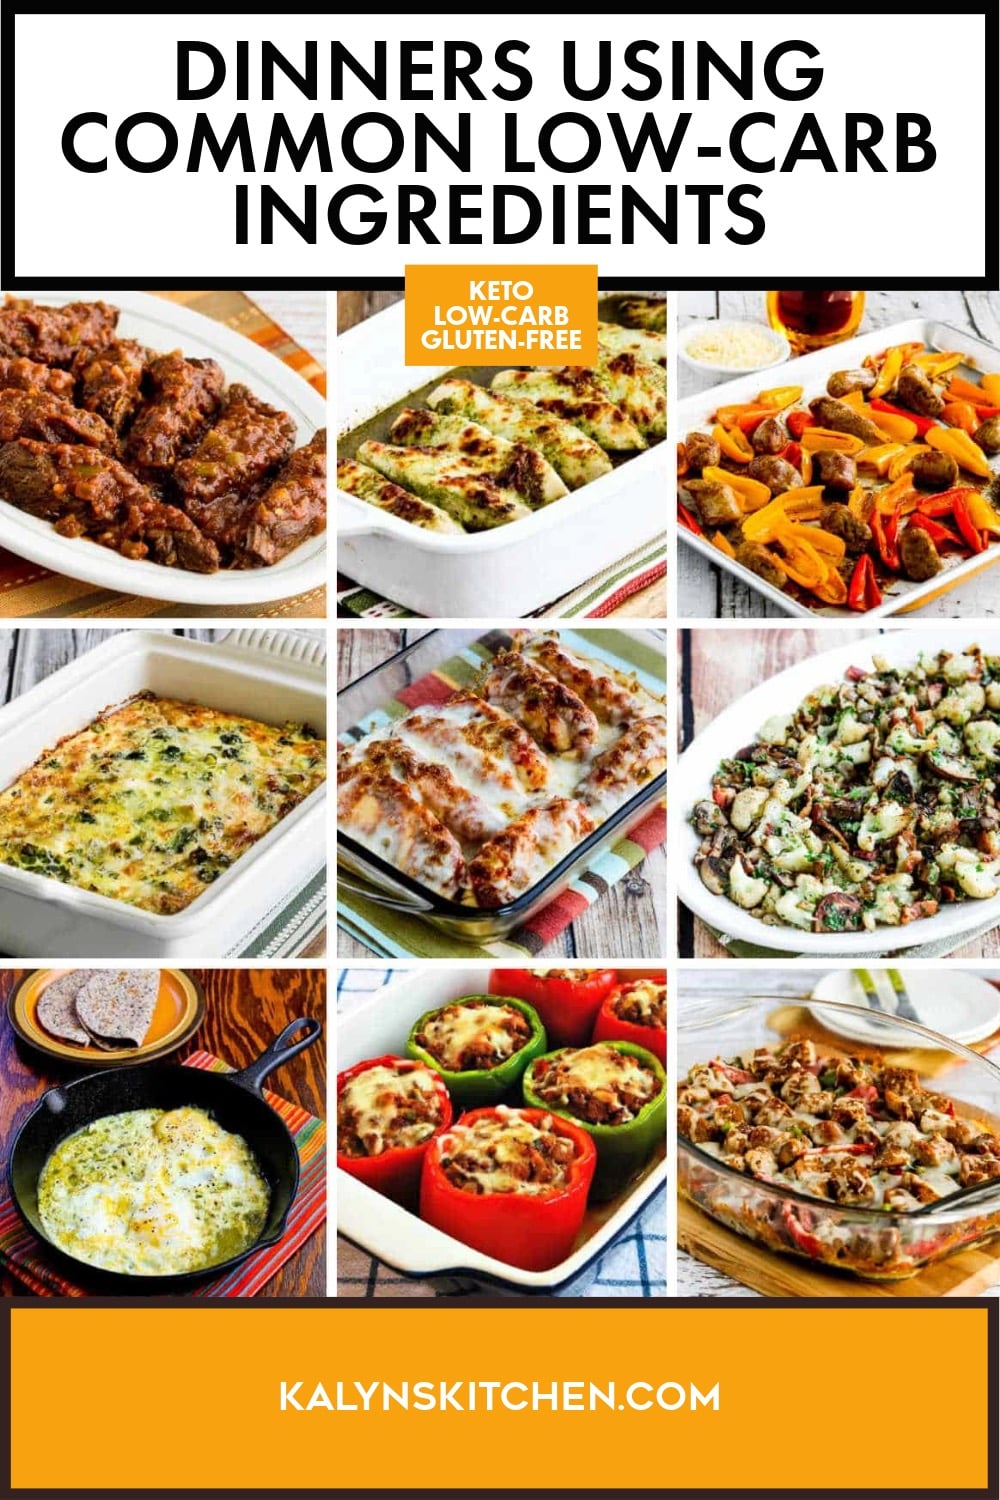 Pinterest image of Dinners Using Common Low-Carb Ingredients